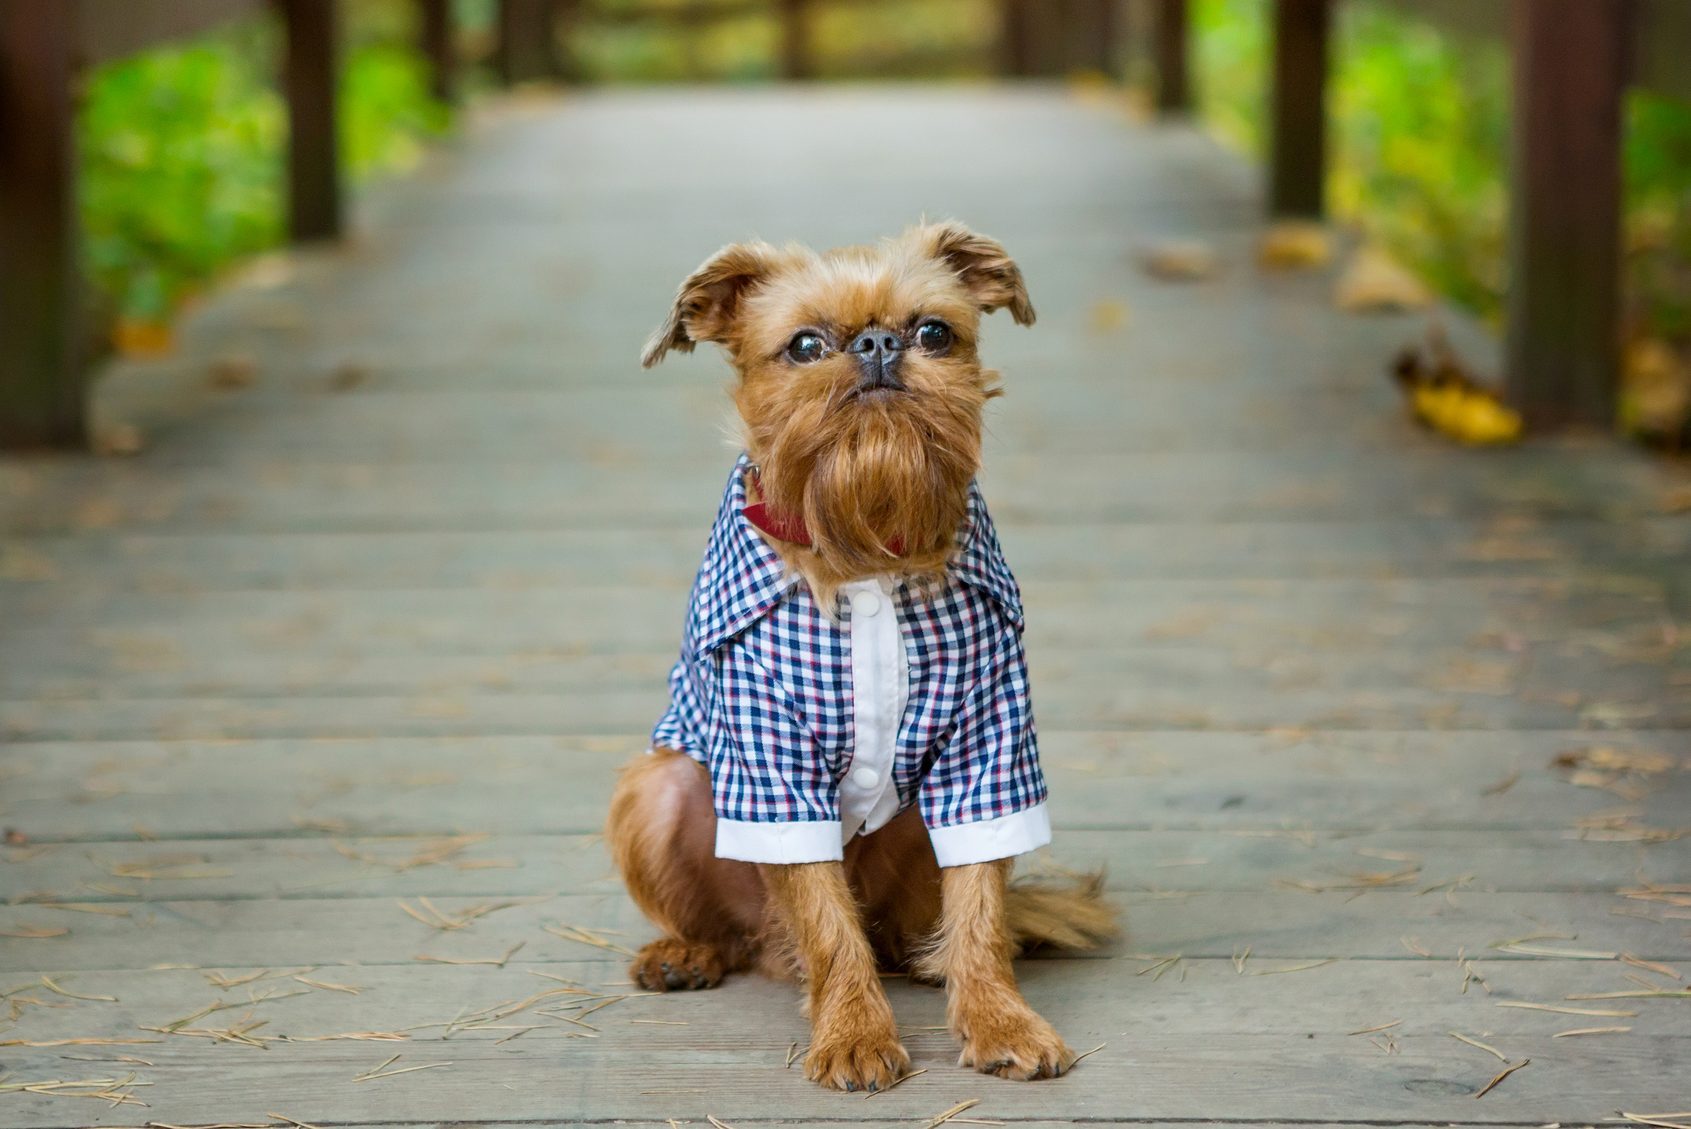 8 Adorable Dogs with Beards — Dogs With Mustaches | Reader's Digest